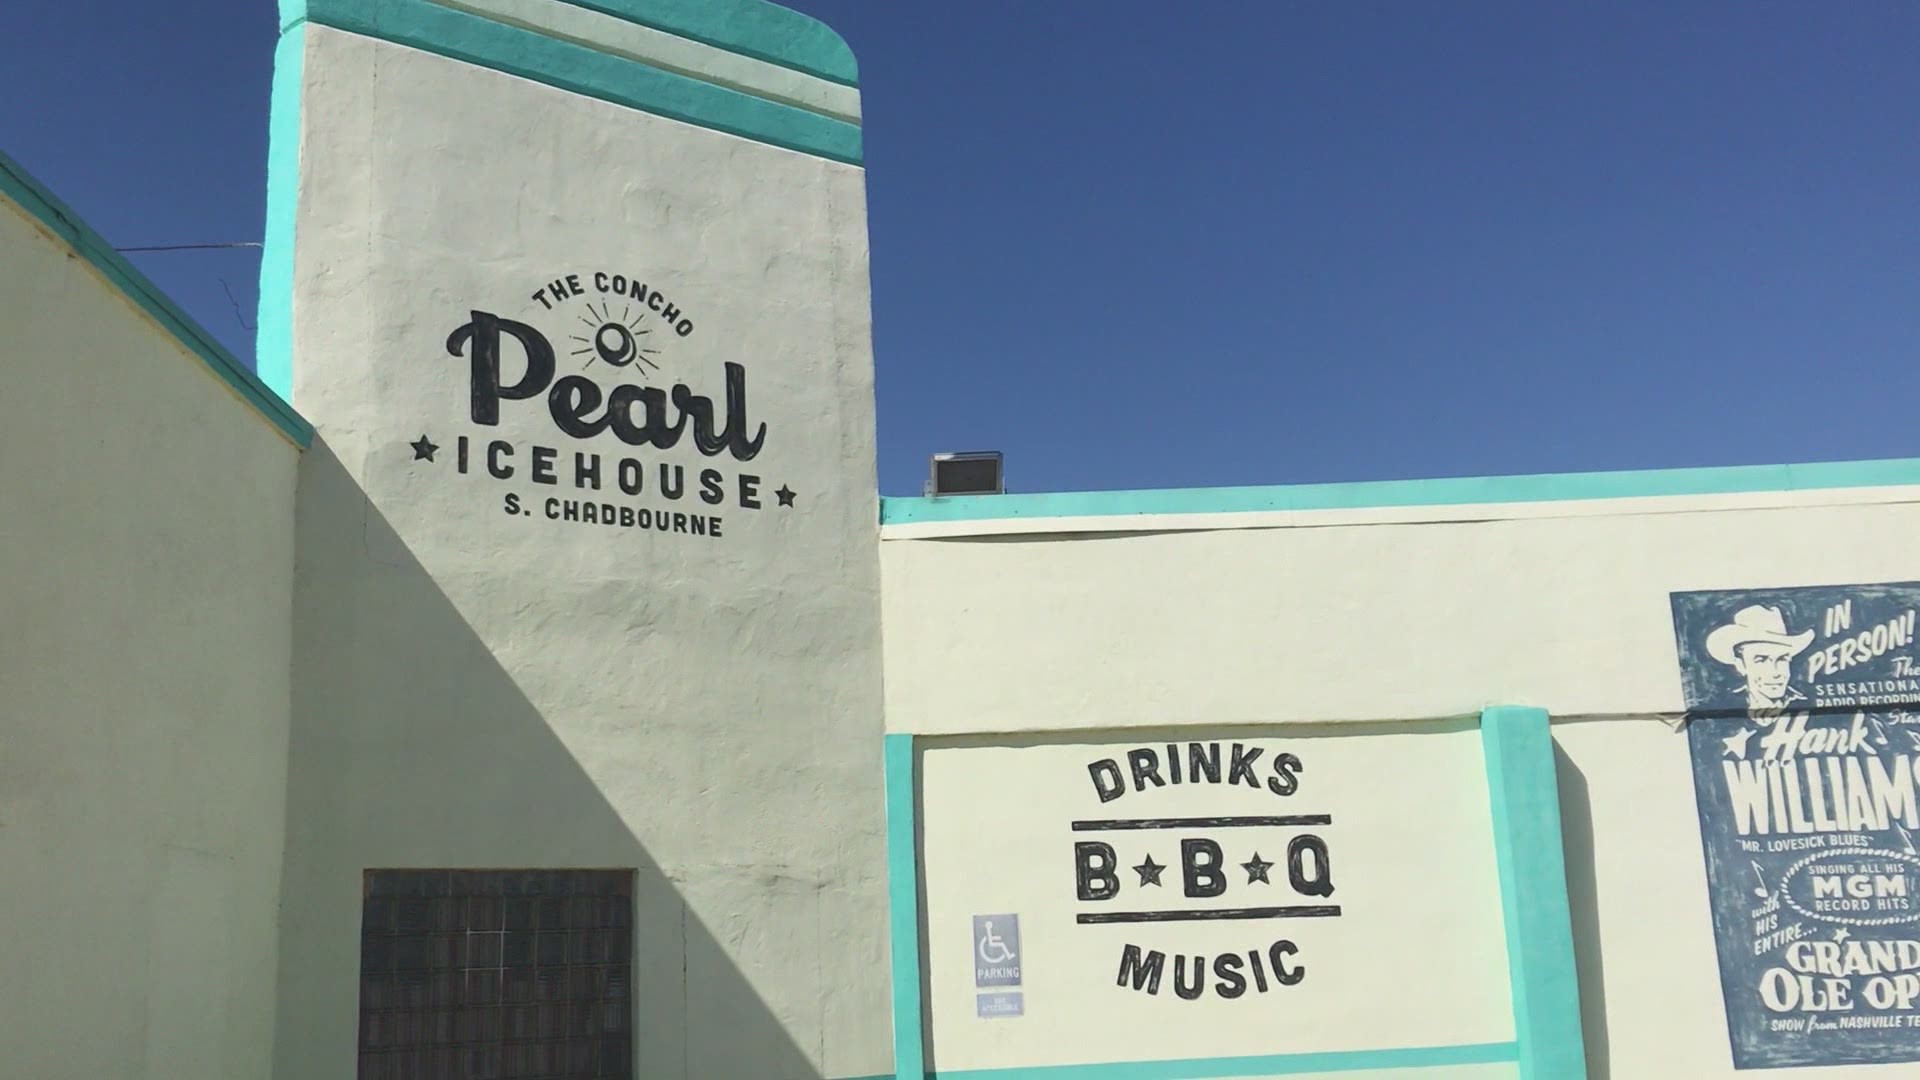 The suspect in a double-stabbing at the Concho Pearl Icehouse has been arrested.